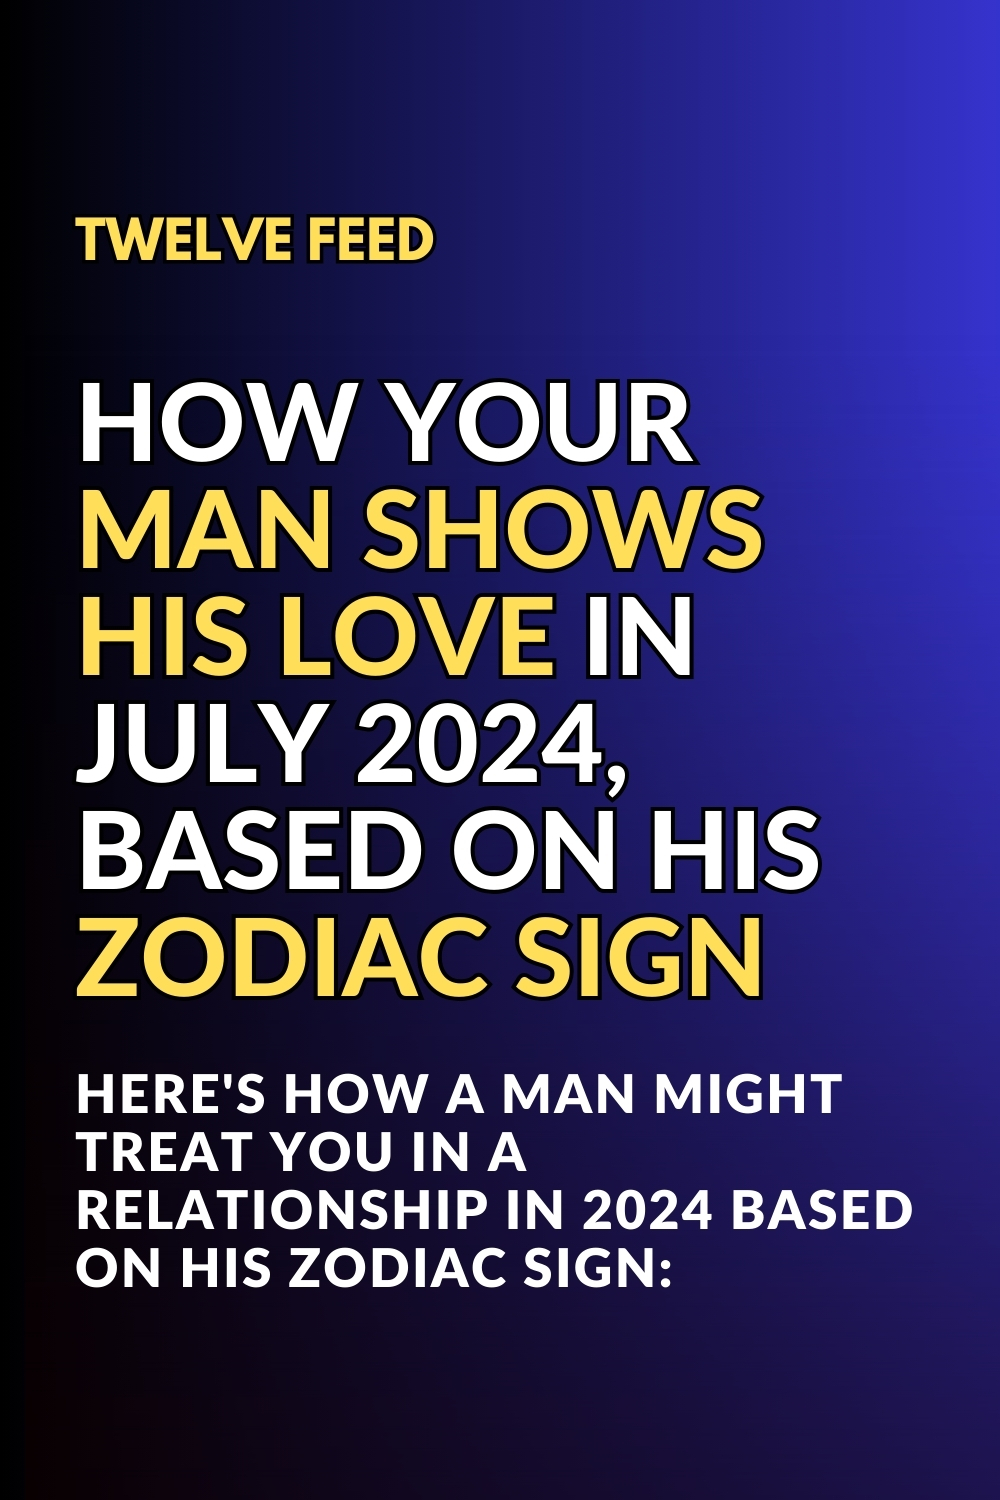 How Your Man Shows His Love In July 2024, Based On His Zodiac Sign